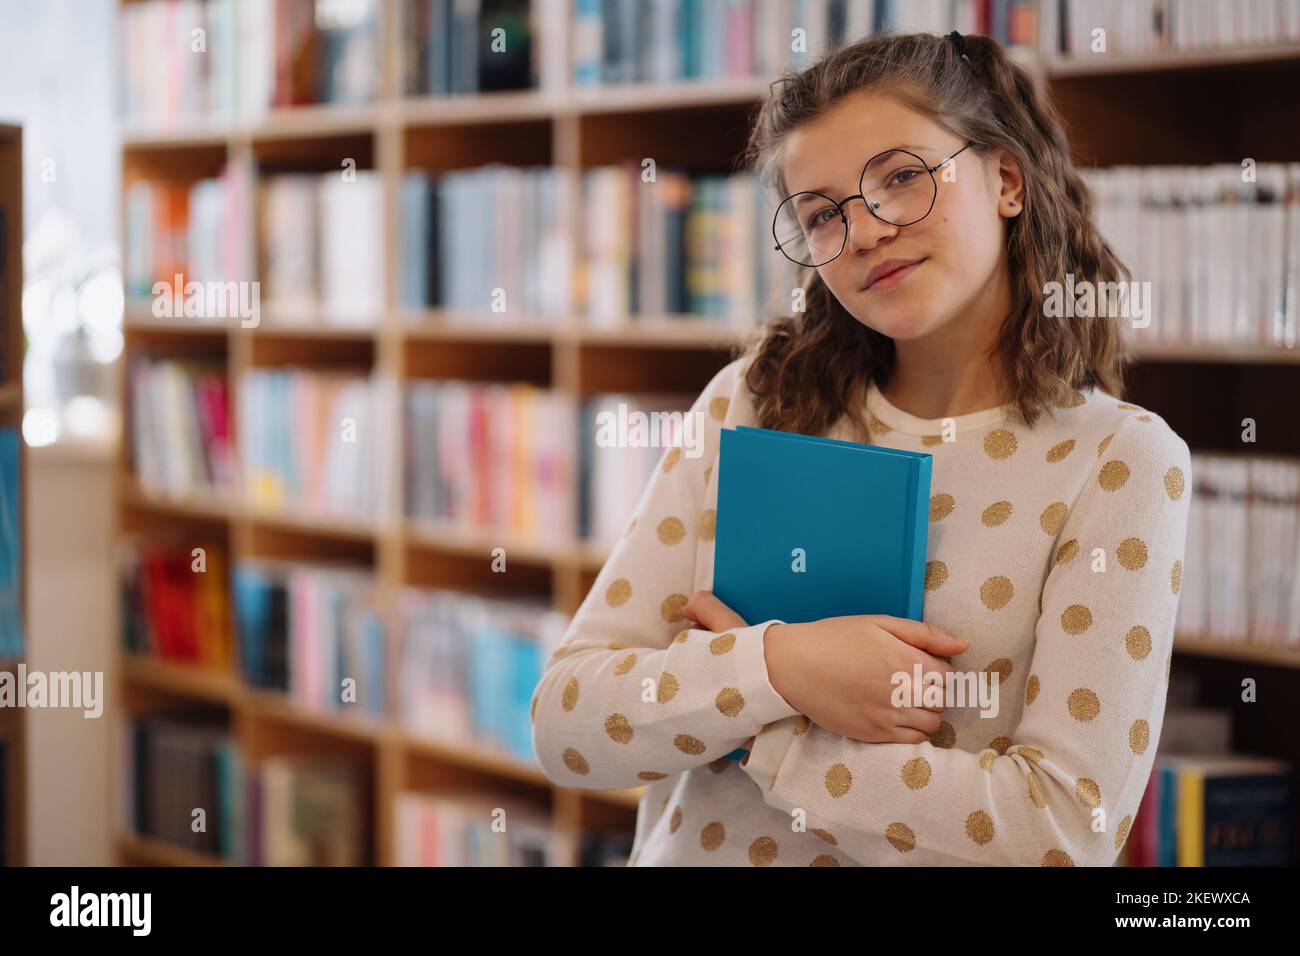 Teen girl among a pile of books. A young girl holding book with shelves in the background. She is surrounded by stacks of books. Book day. Stock Photo